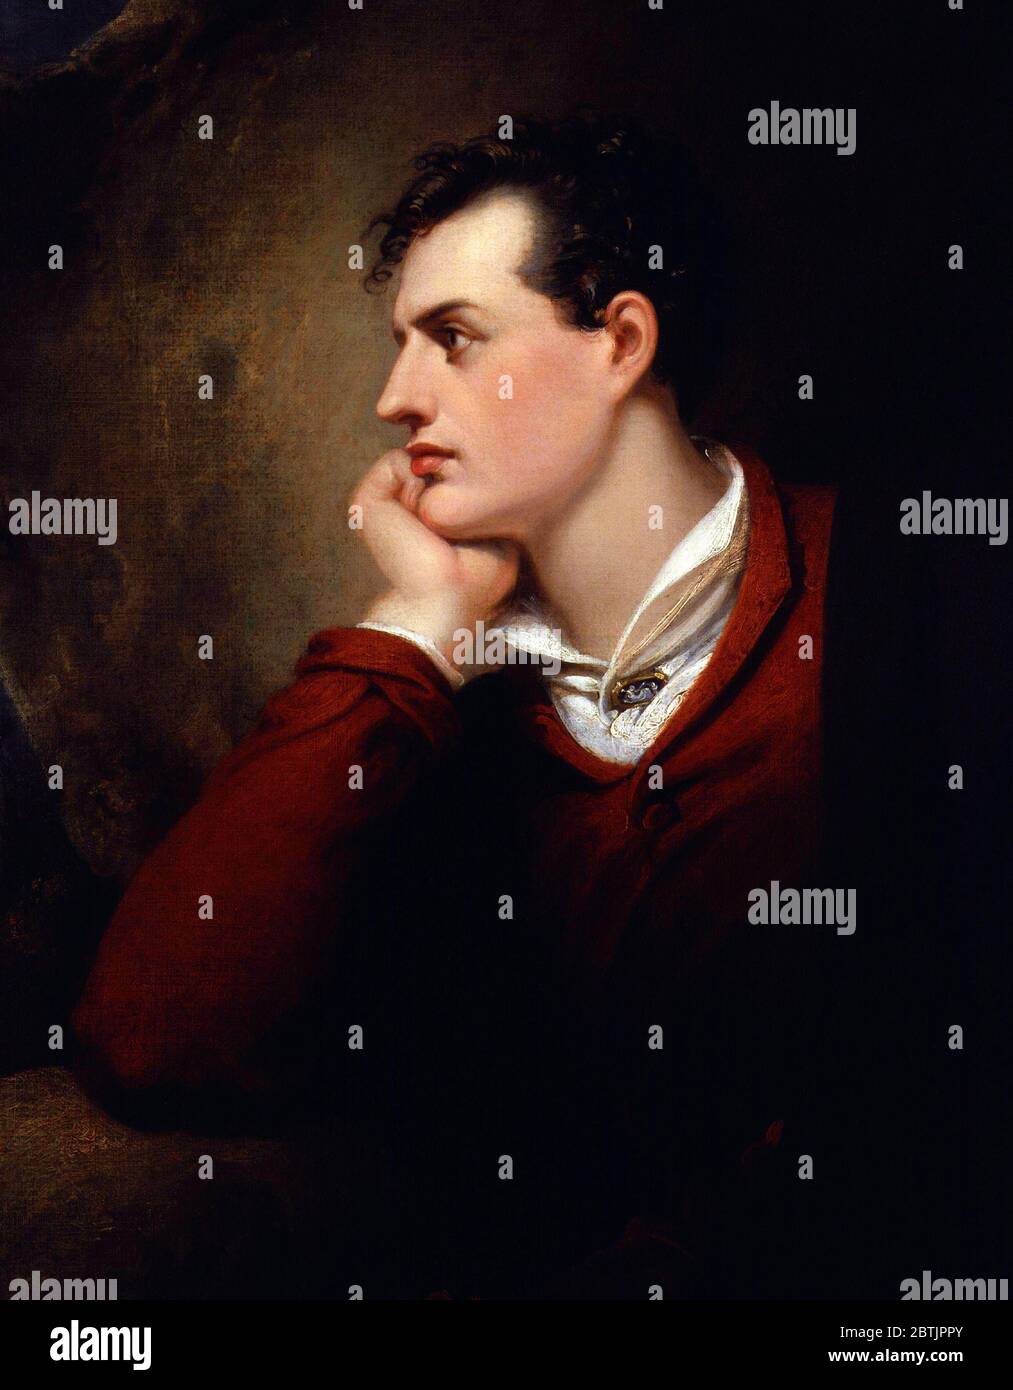 Portrait of Lord Byron by Richard Westall, oil on canvas, 1813. George Gordon Byron, 6th Baron Byron (1788-1824), was an English poet and a leading figure in the Romantic movement. Stock Photo